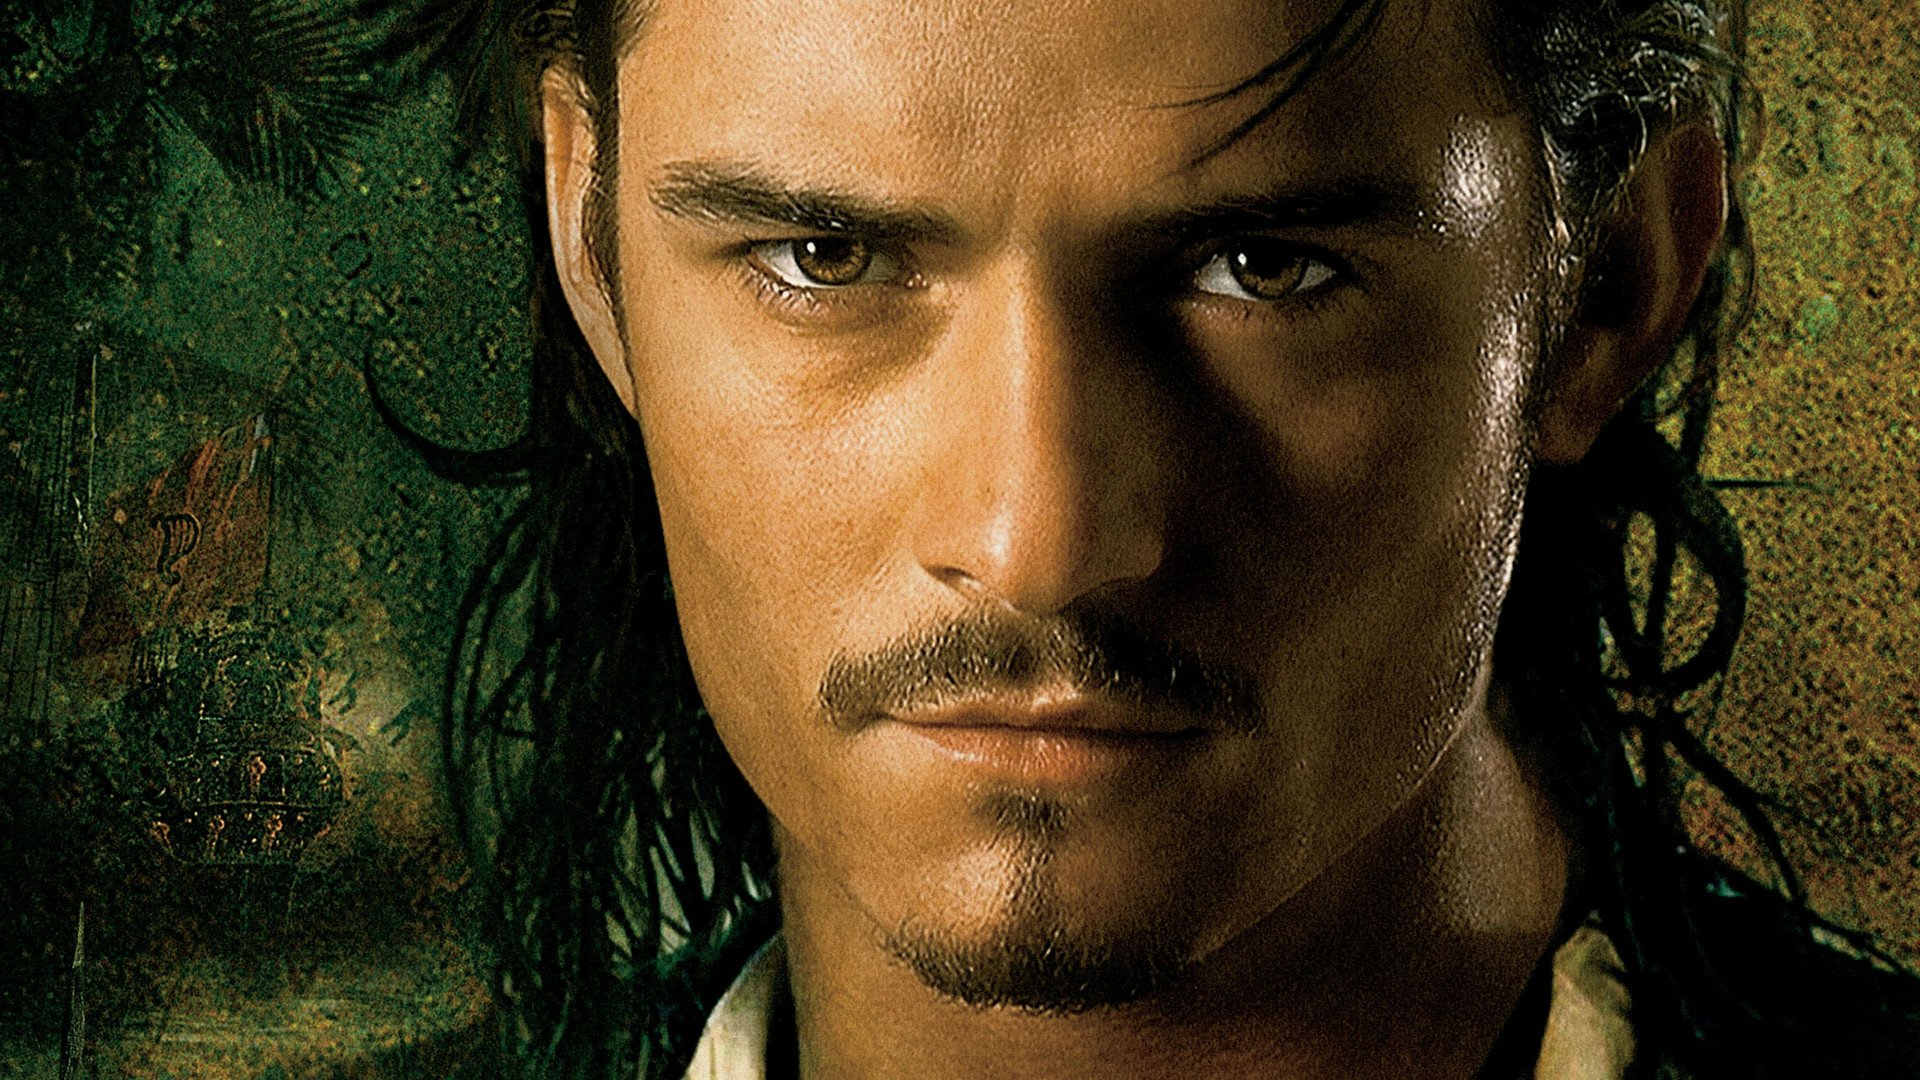 Pirates of the Caribbean: Dead Man’s for ios instal